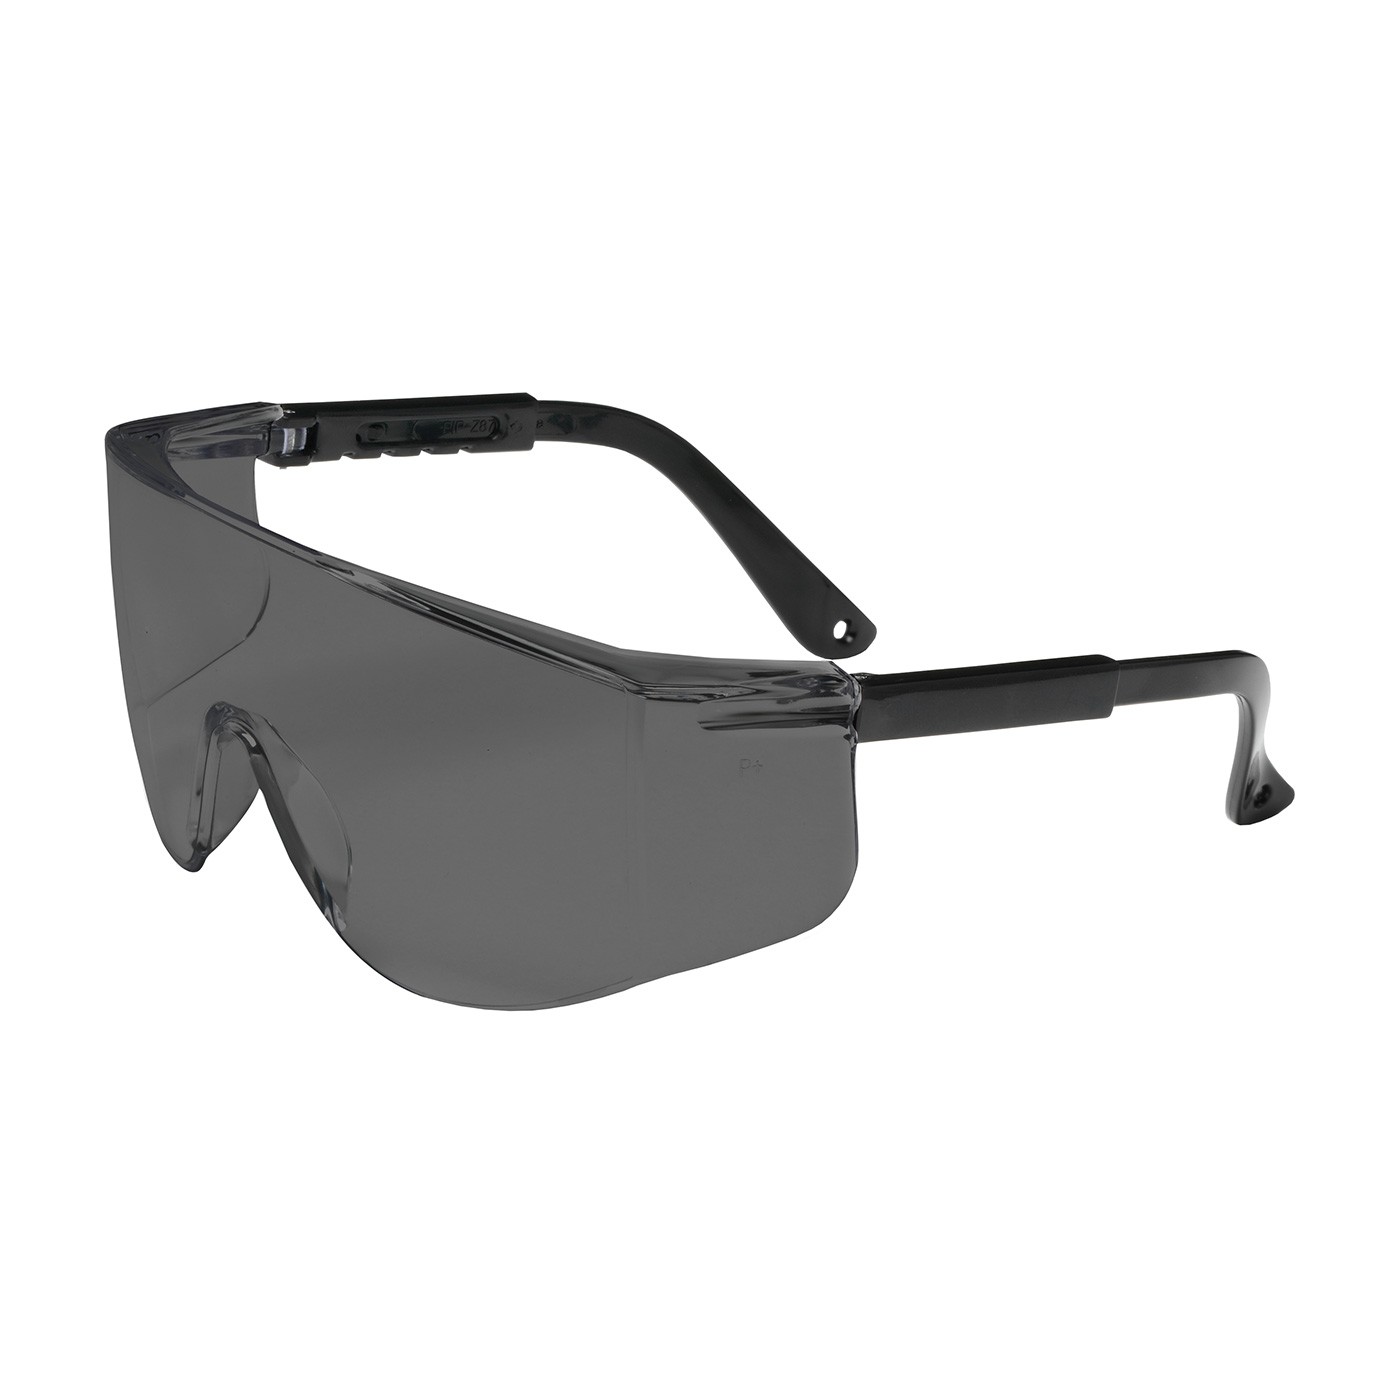 Zenon Z28™ OTG Rimless Safety Glasses with Black Temple, Gray Lens and Anti-Scratch Coating  (#250-03-0001)